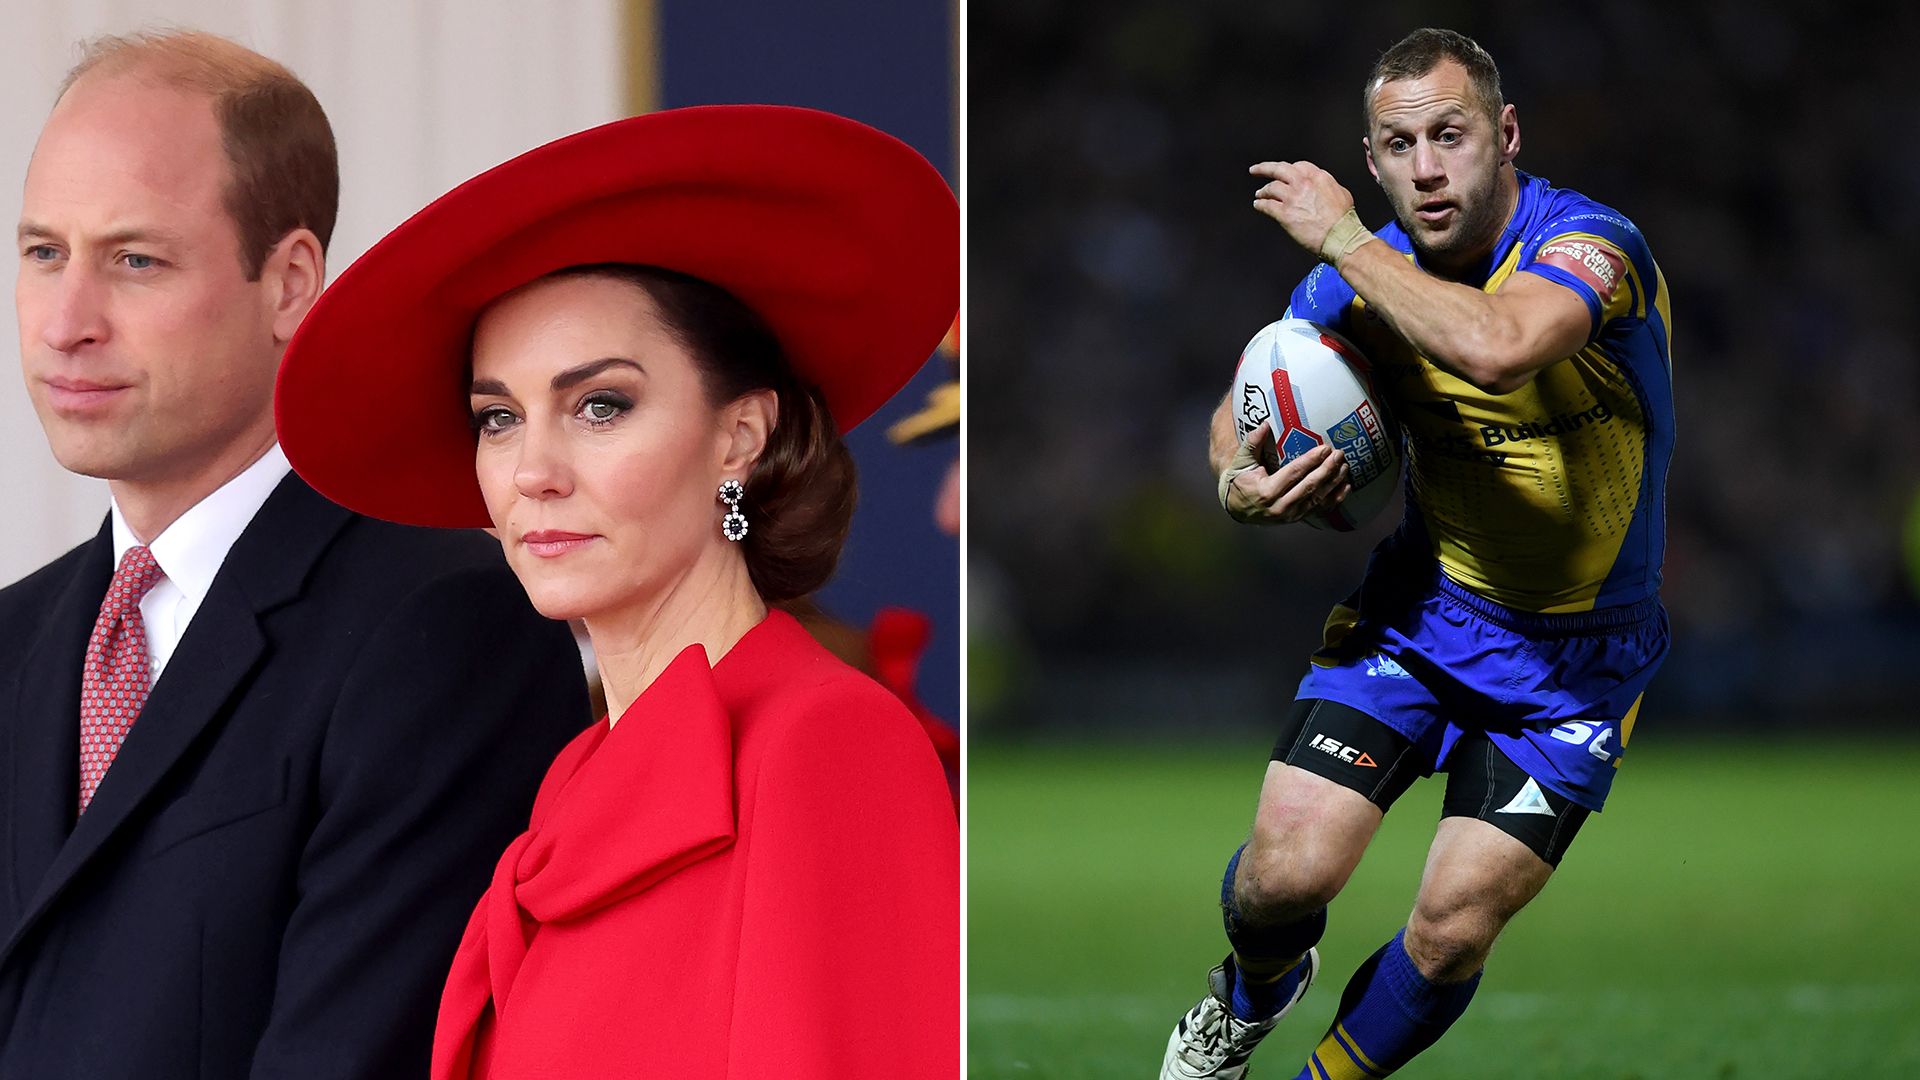 Prince William and Princess Kate pay tribute to 'legend' Rob Burrow following his death